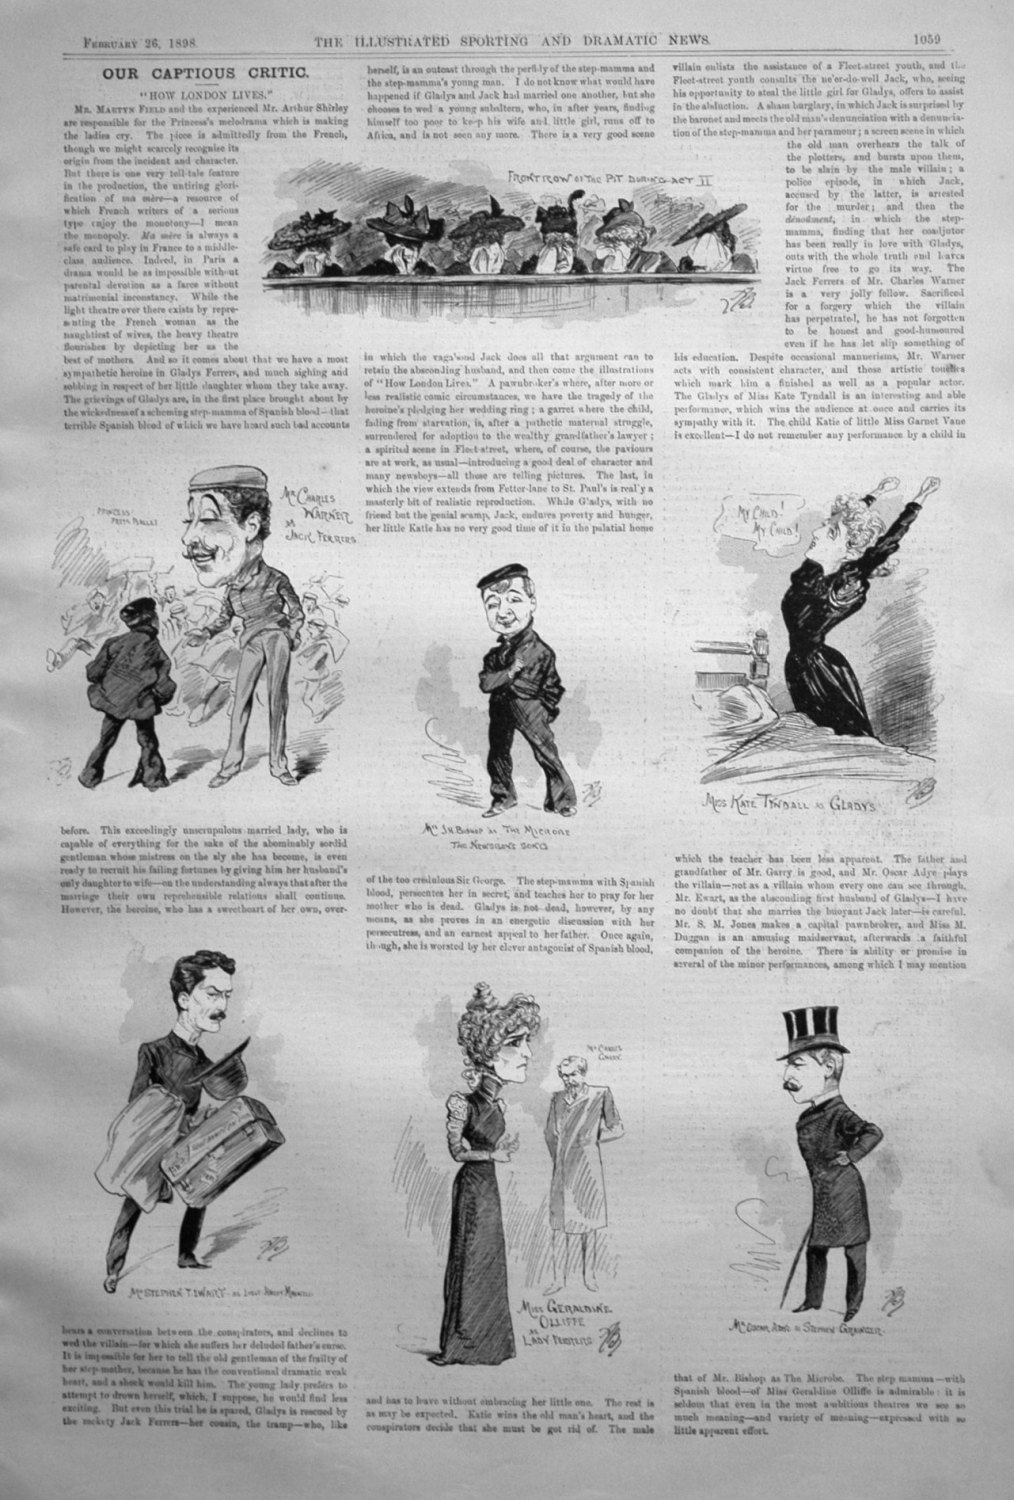 Our Captious Critic, February 26th 1898.